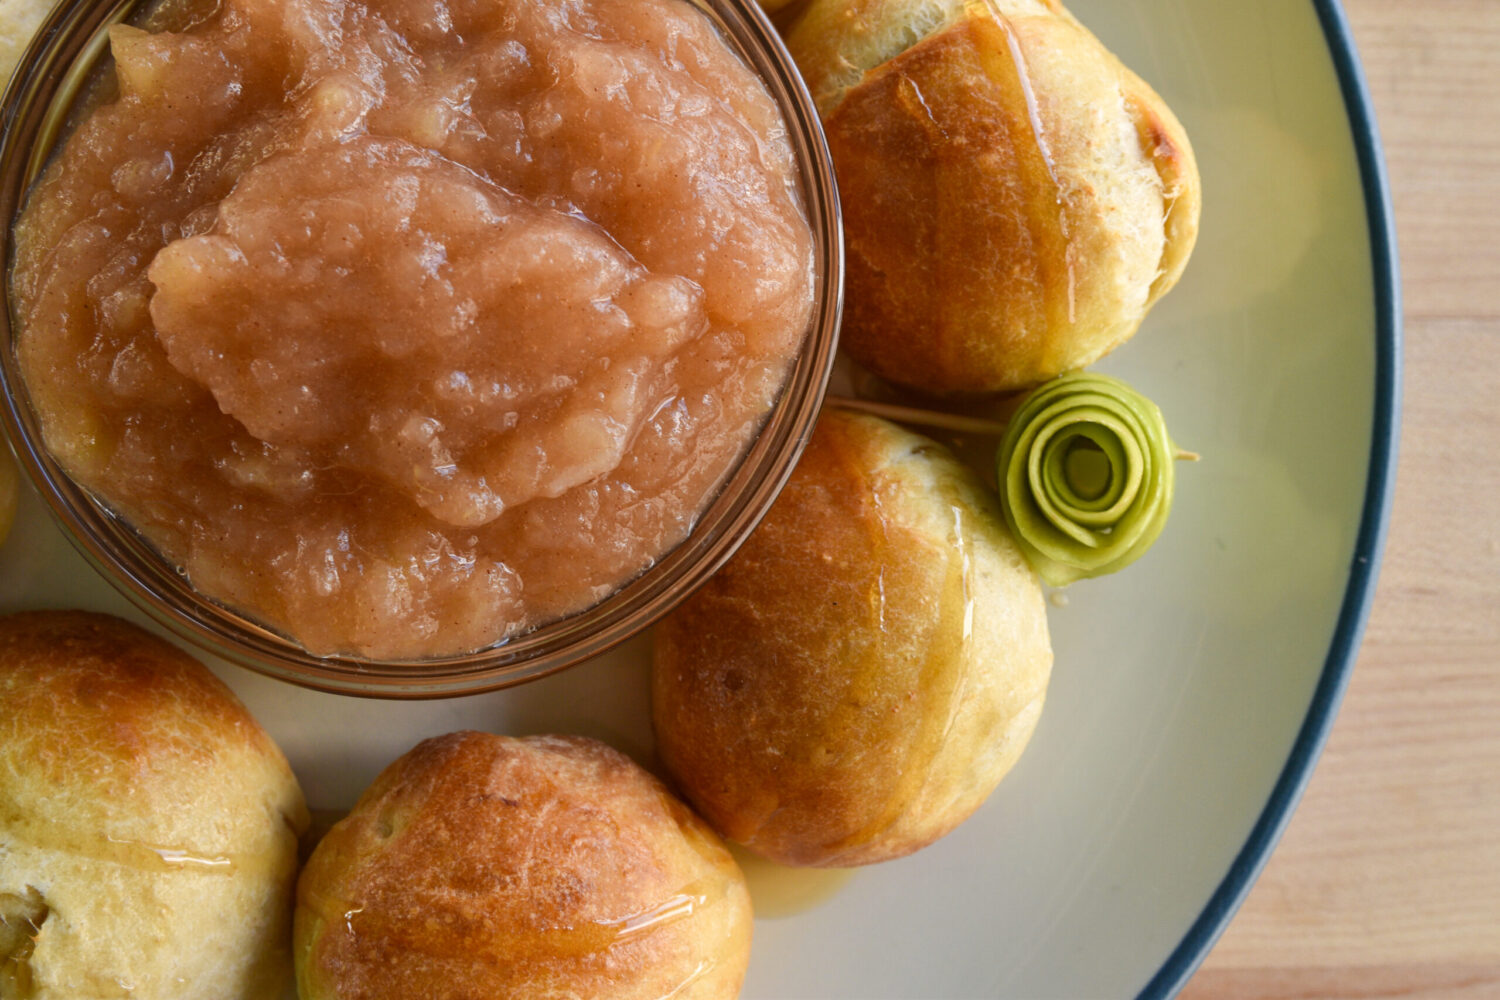 a bowl of applesauce surrounded by pieces of challah bread